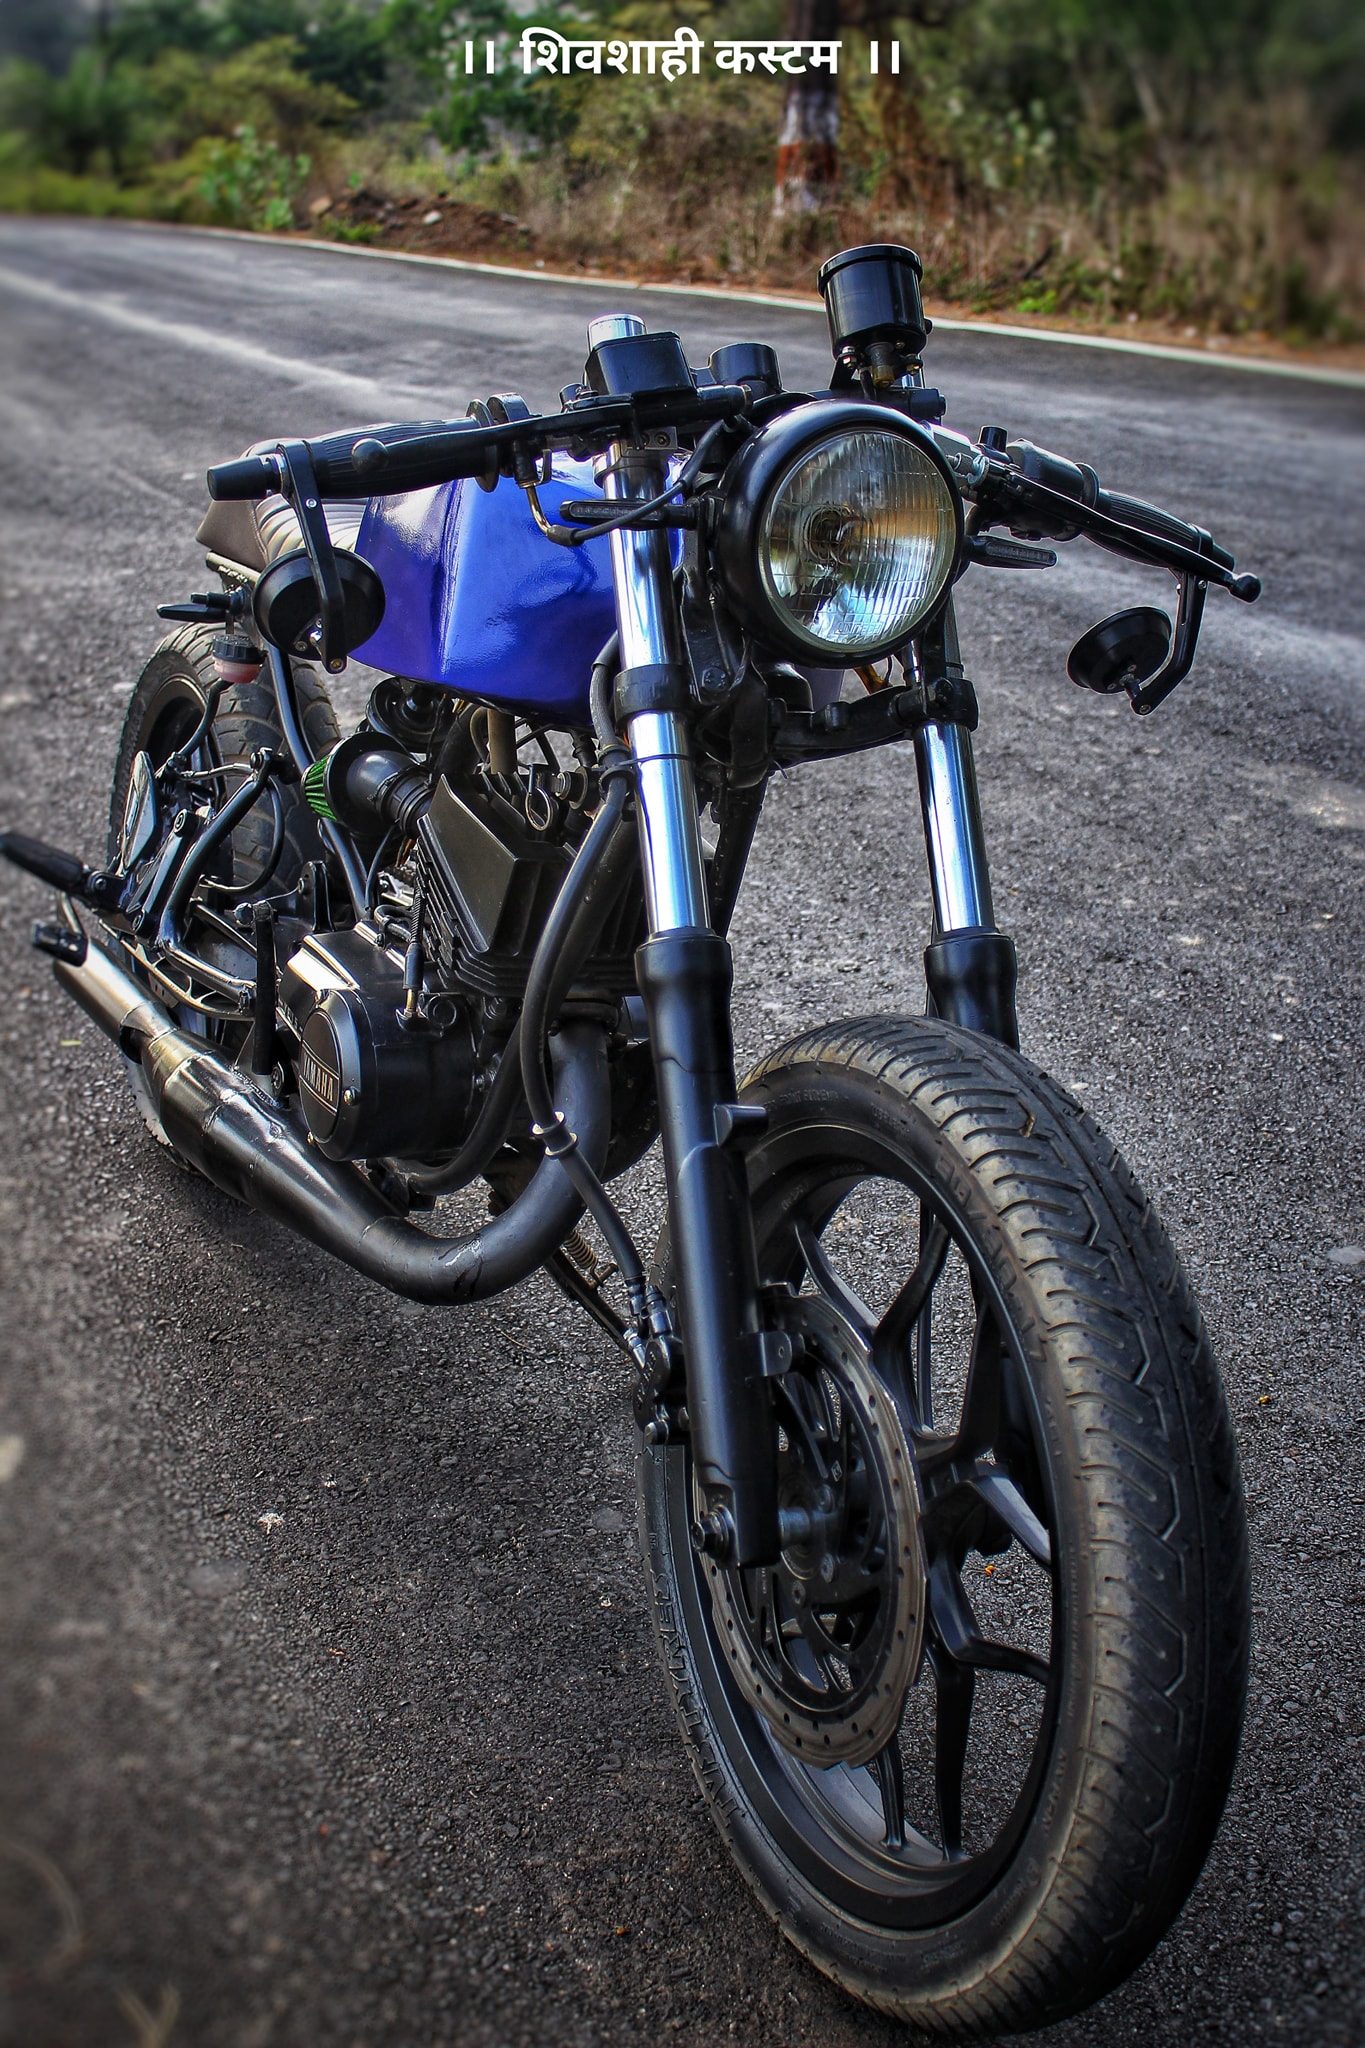 Perfectly Modified Yamaha RX135 Cafe Racer by Shivshahi Customs - foreground